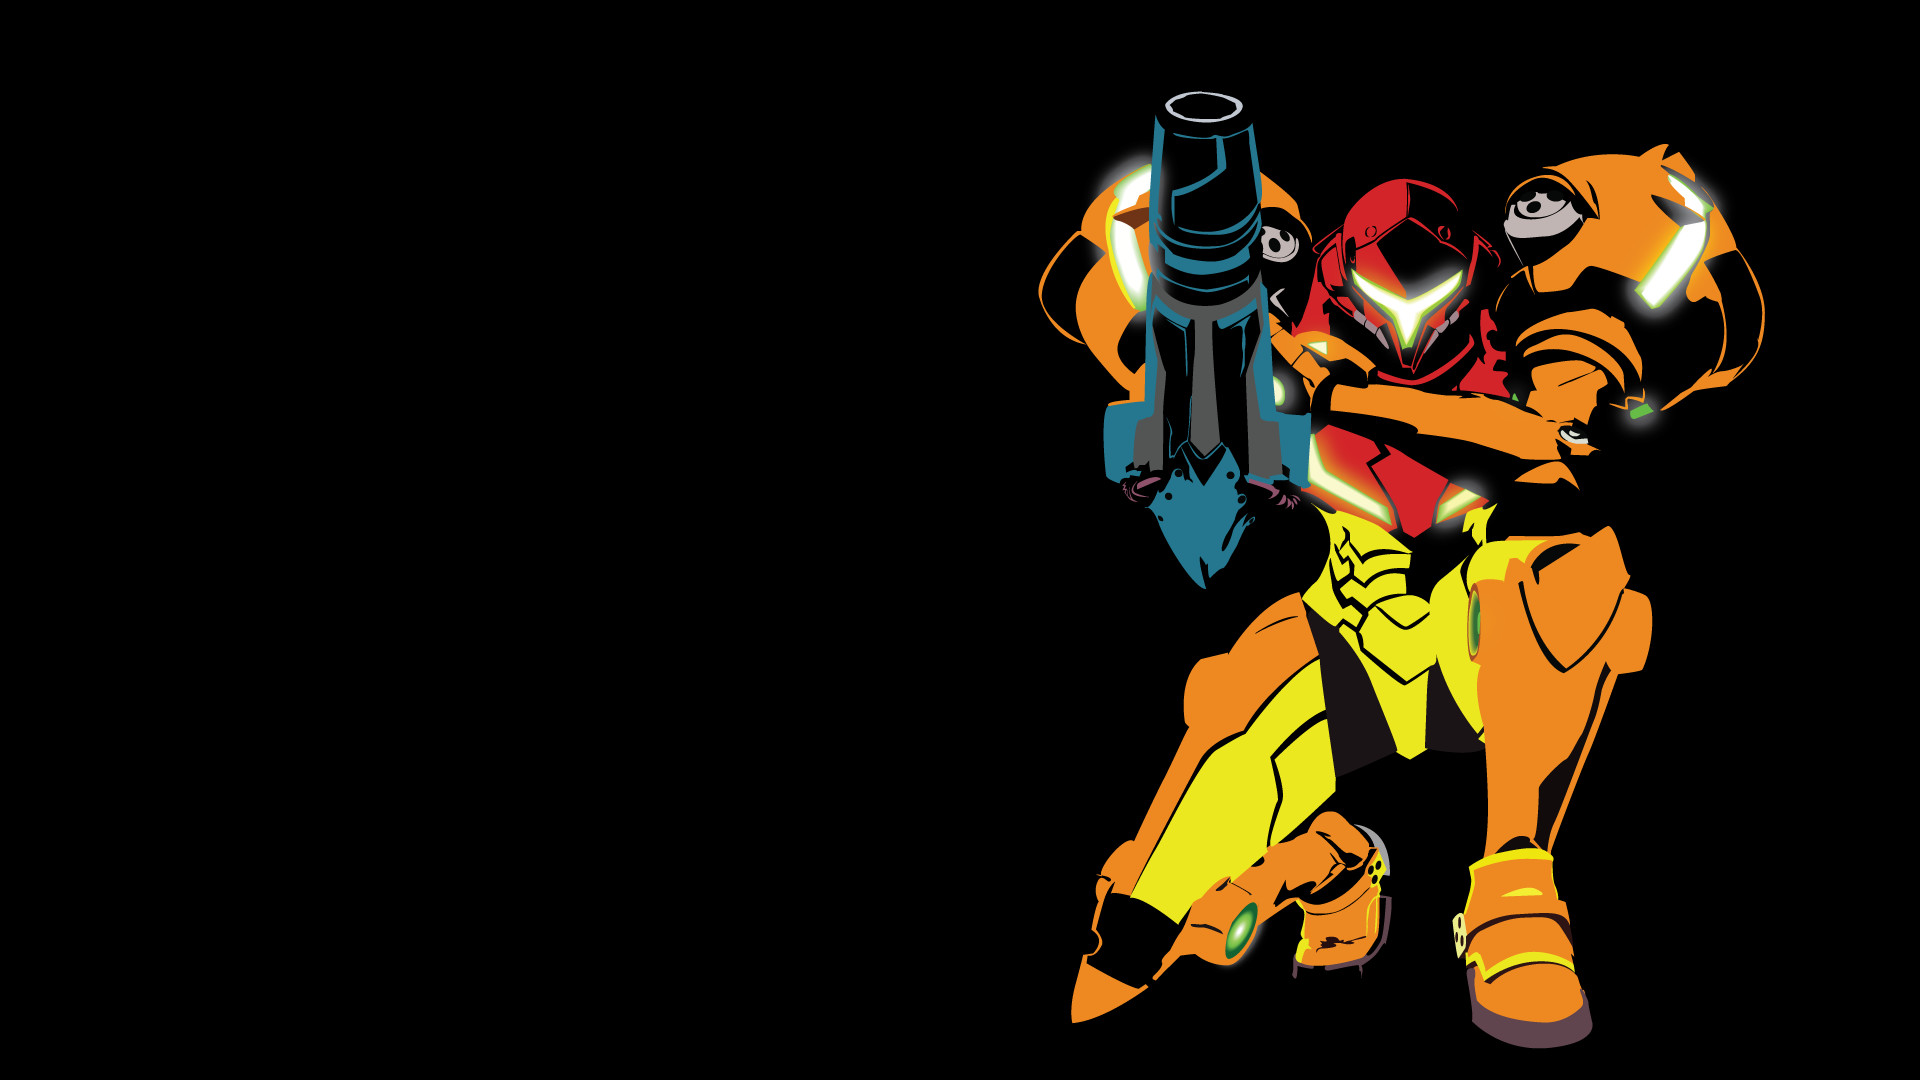 1920x1080 I made a vector/minimalist wallpaper () of Samus in her Metroid 2